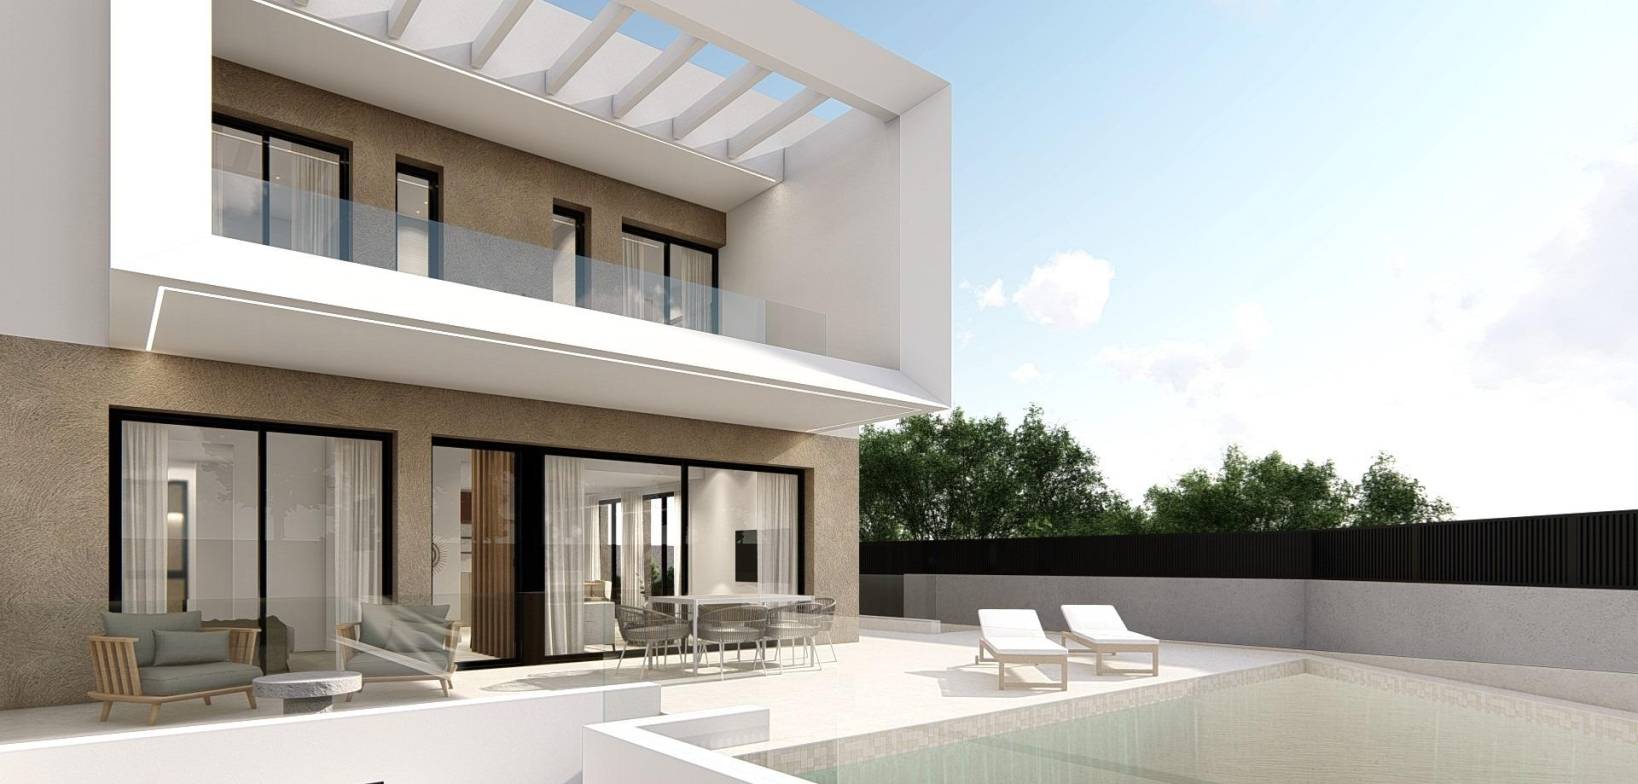 Nybyggnation - Quad House - Dolores - Costa Blanca South